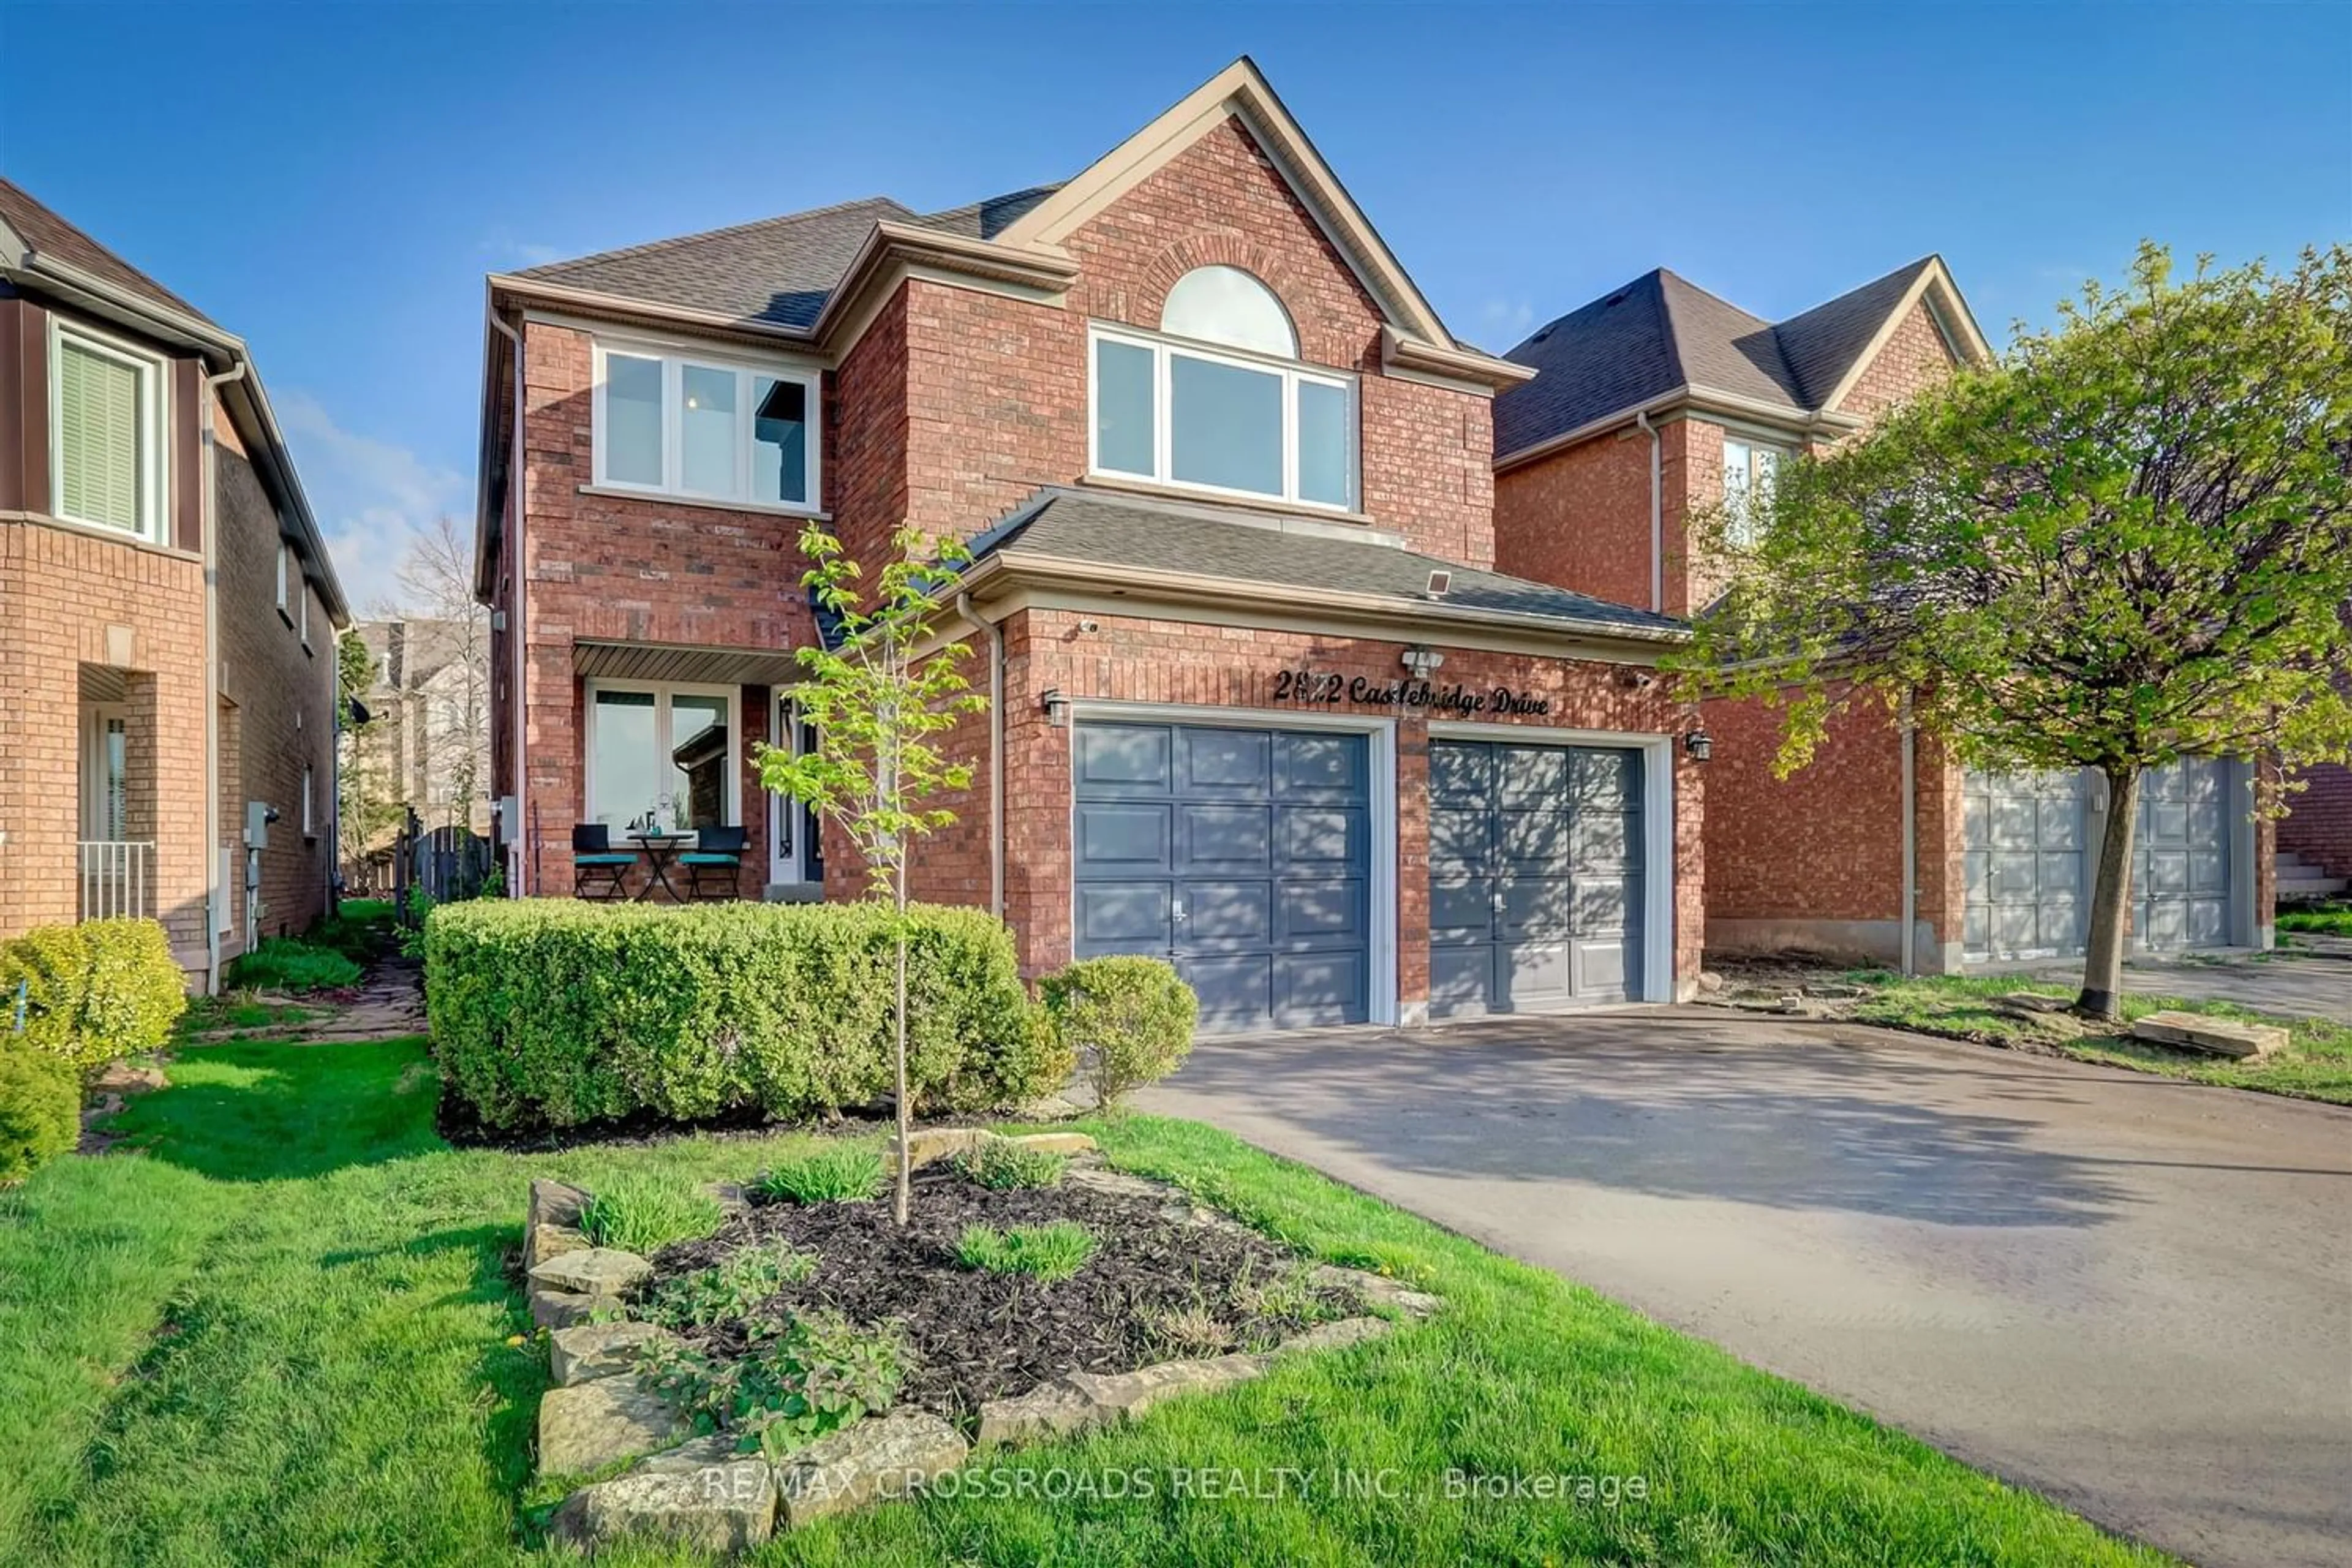 Home with brick exterior material for 2822 Castlebridge Dr, Mississauga Ontario L5M 5T5